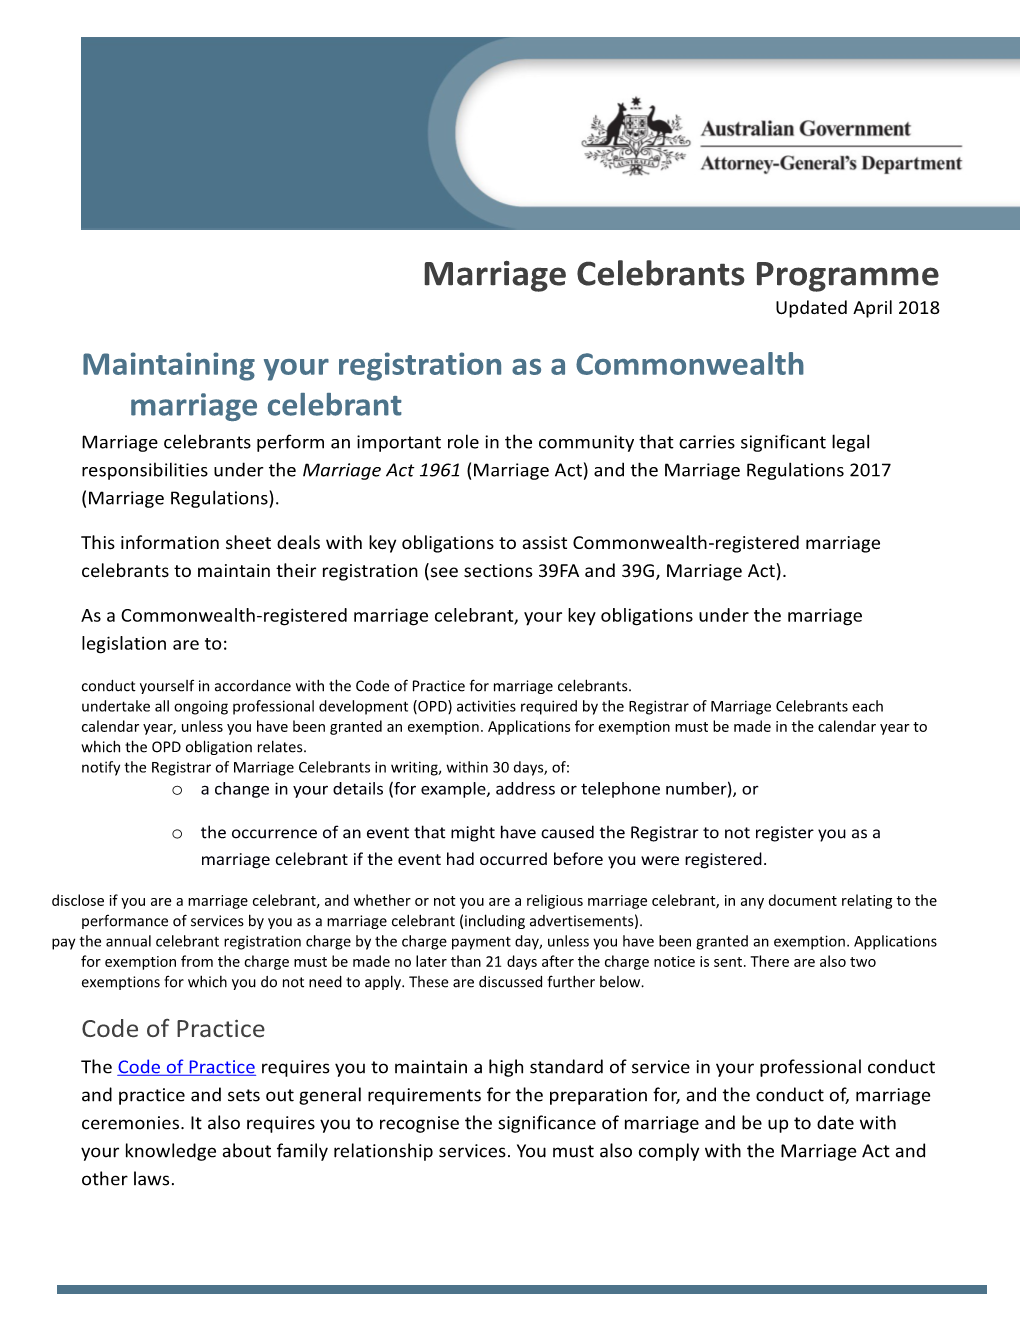 Maintaining a Registration As a Commonwealth Marriage Celebrant - Updated April 2018